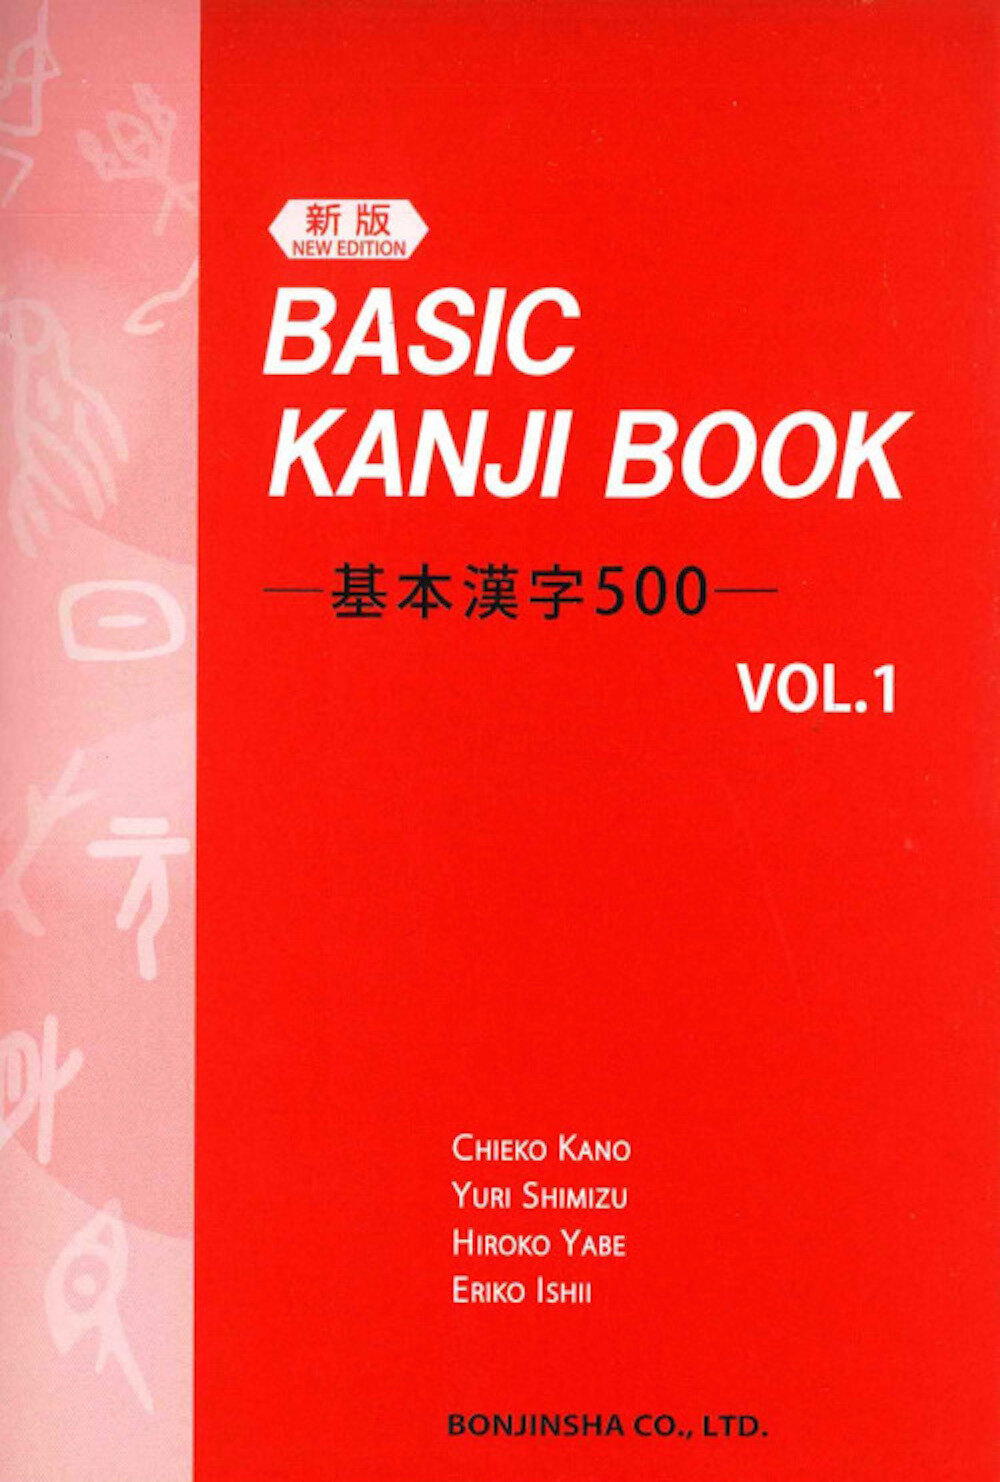 Japanese Writing Practice Book  Calligraphy Copy Book Japanese